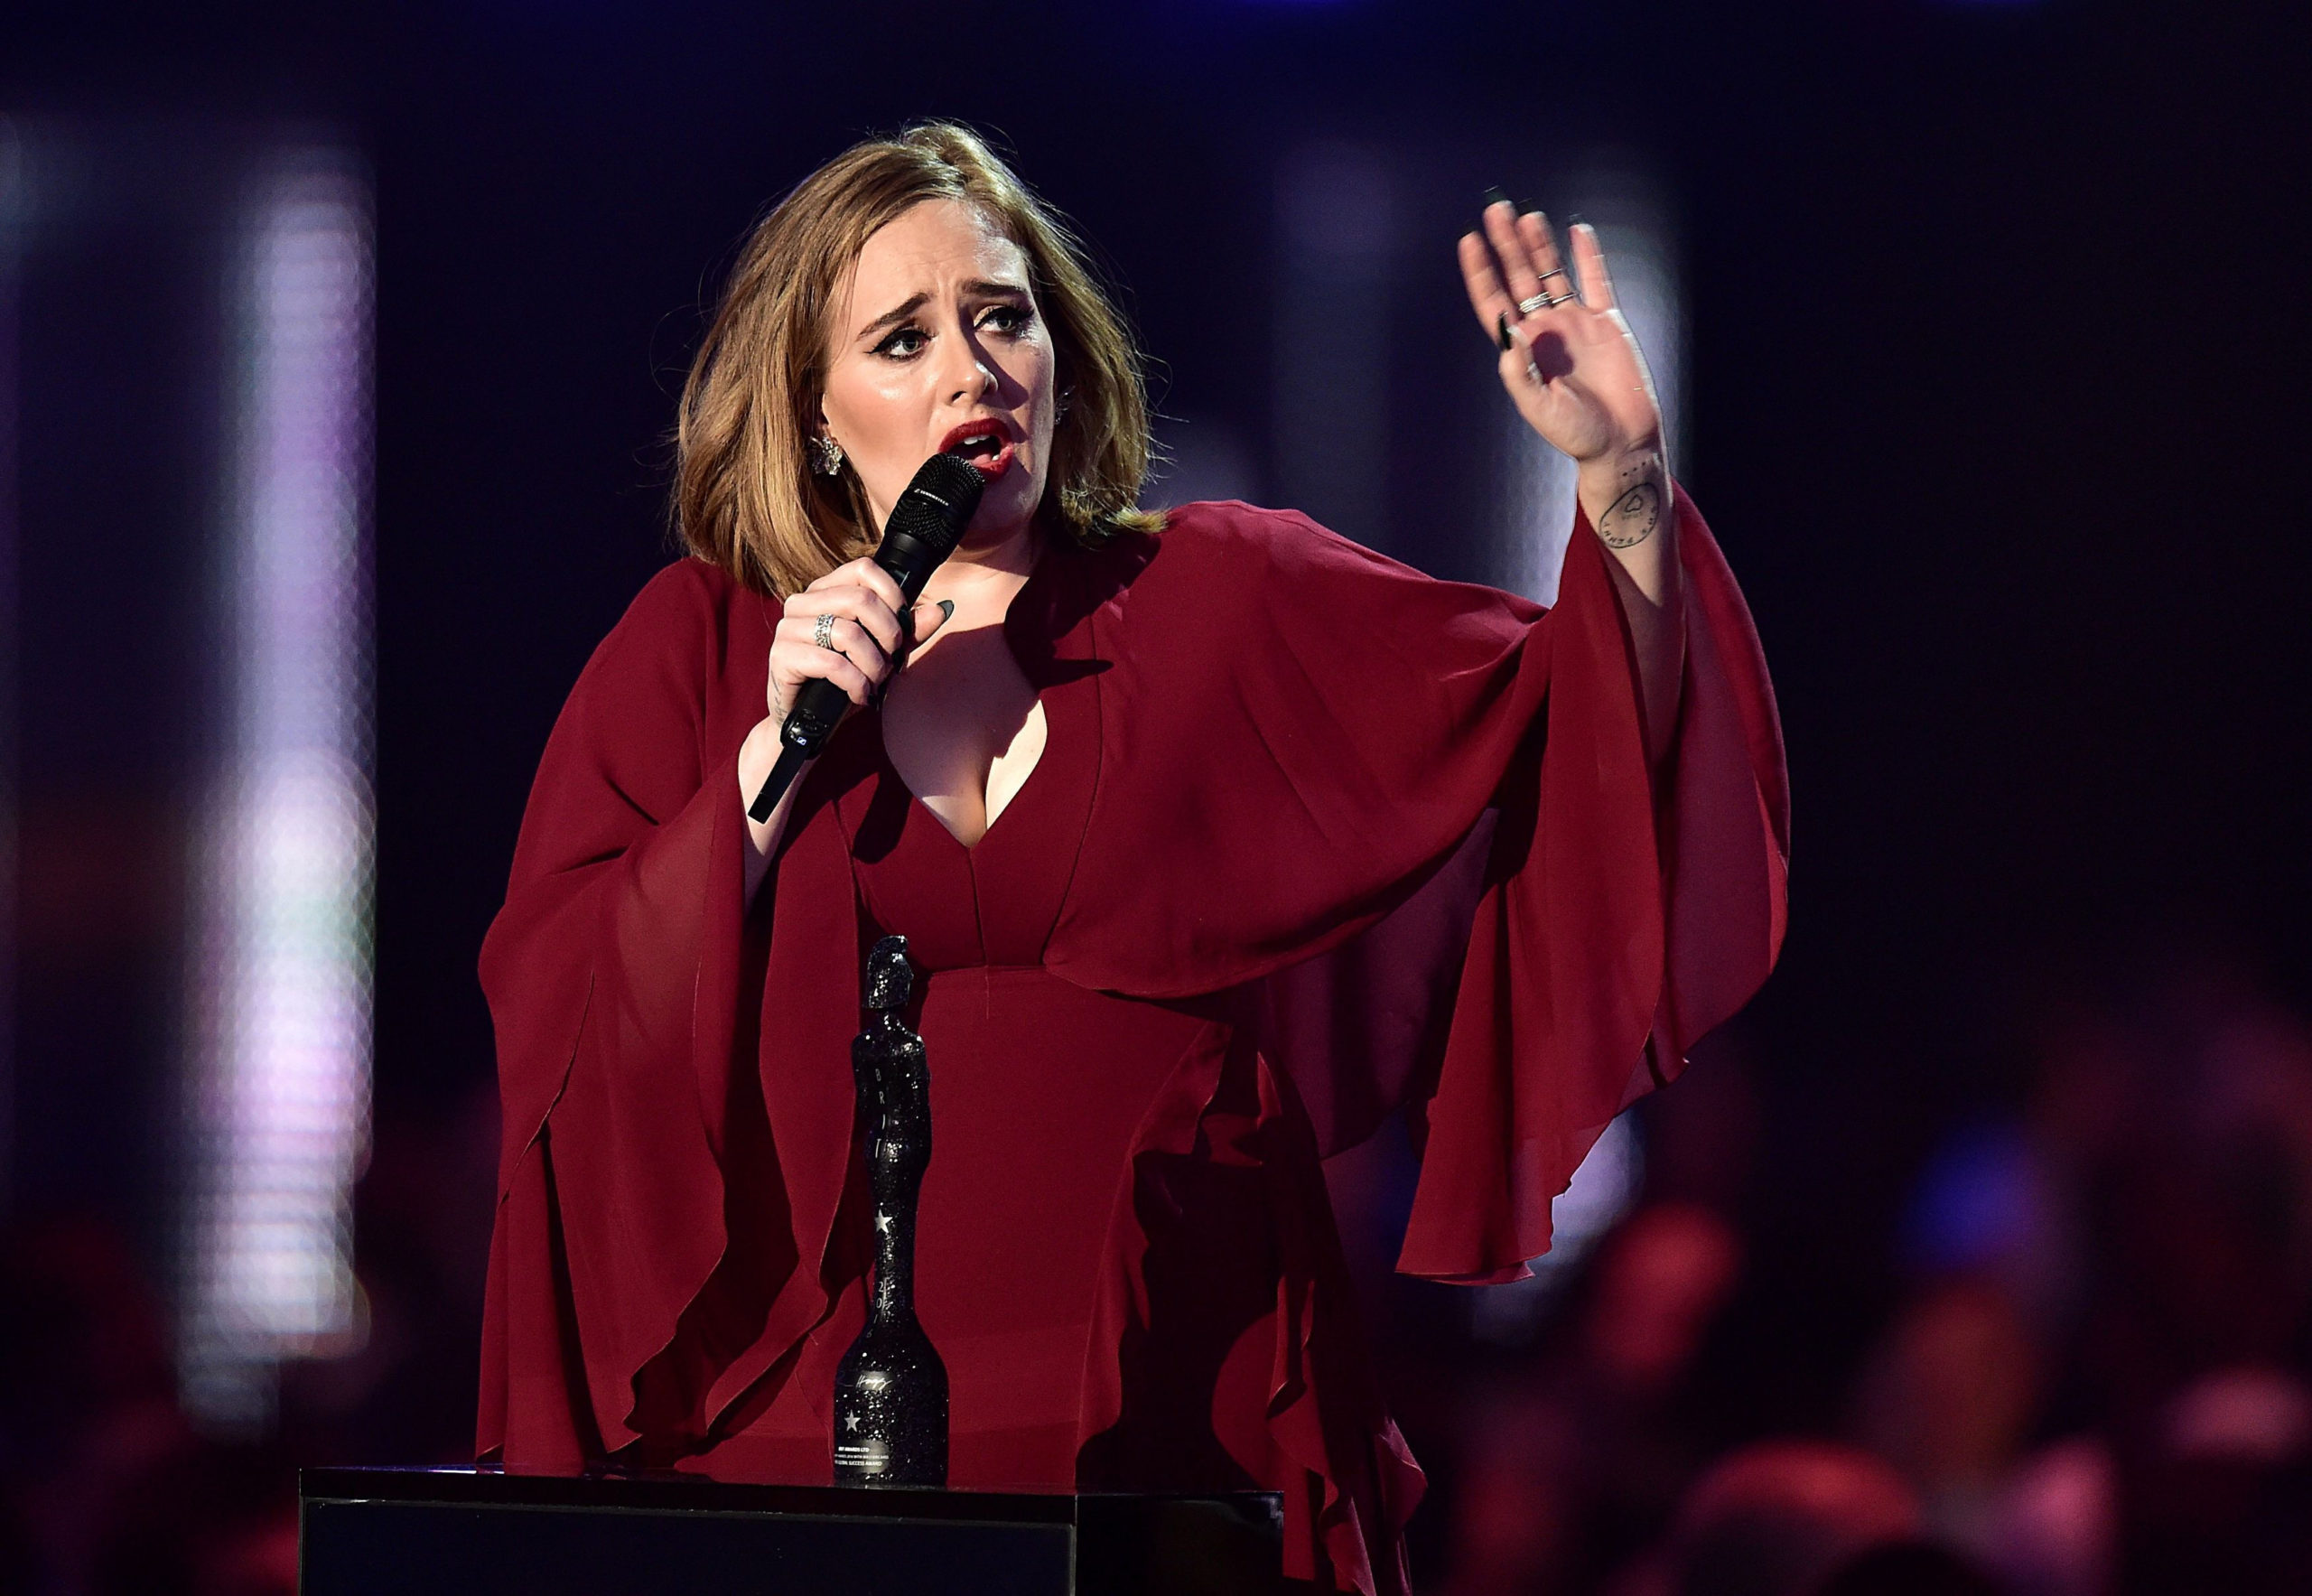 Adele Las Vegas Residence Tickets: Order Online to Find Seats